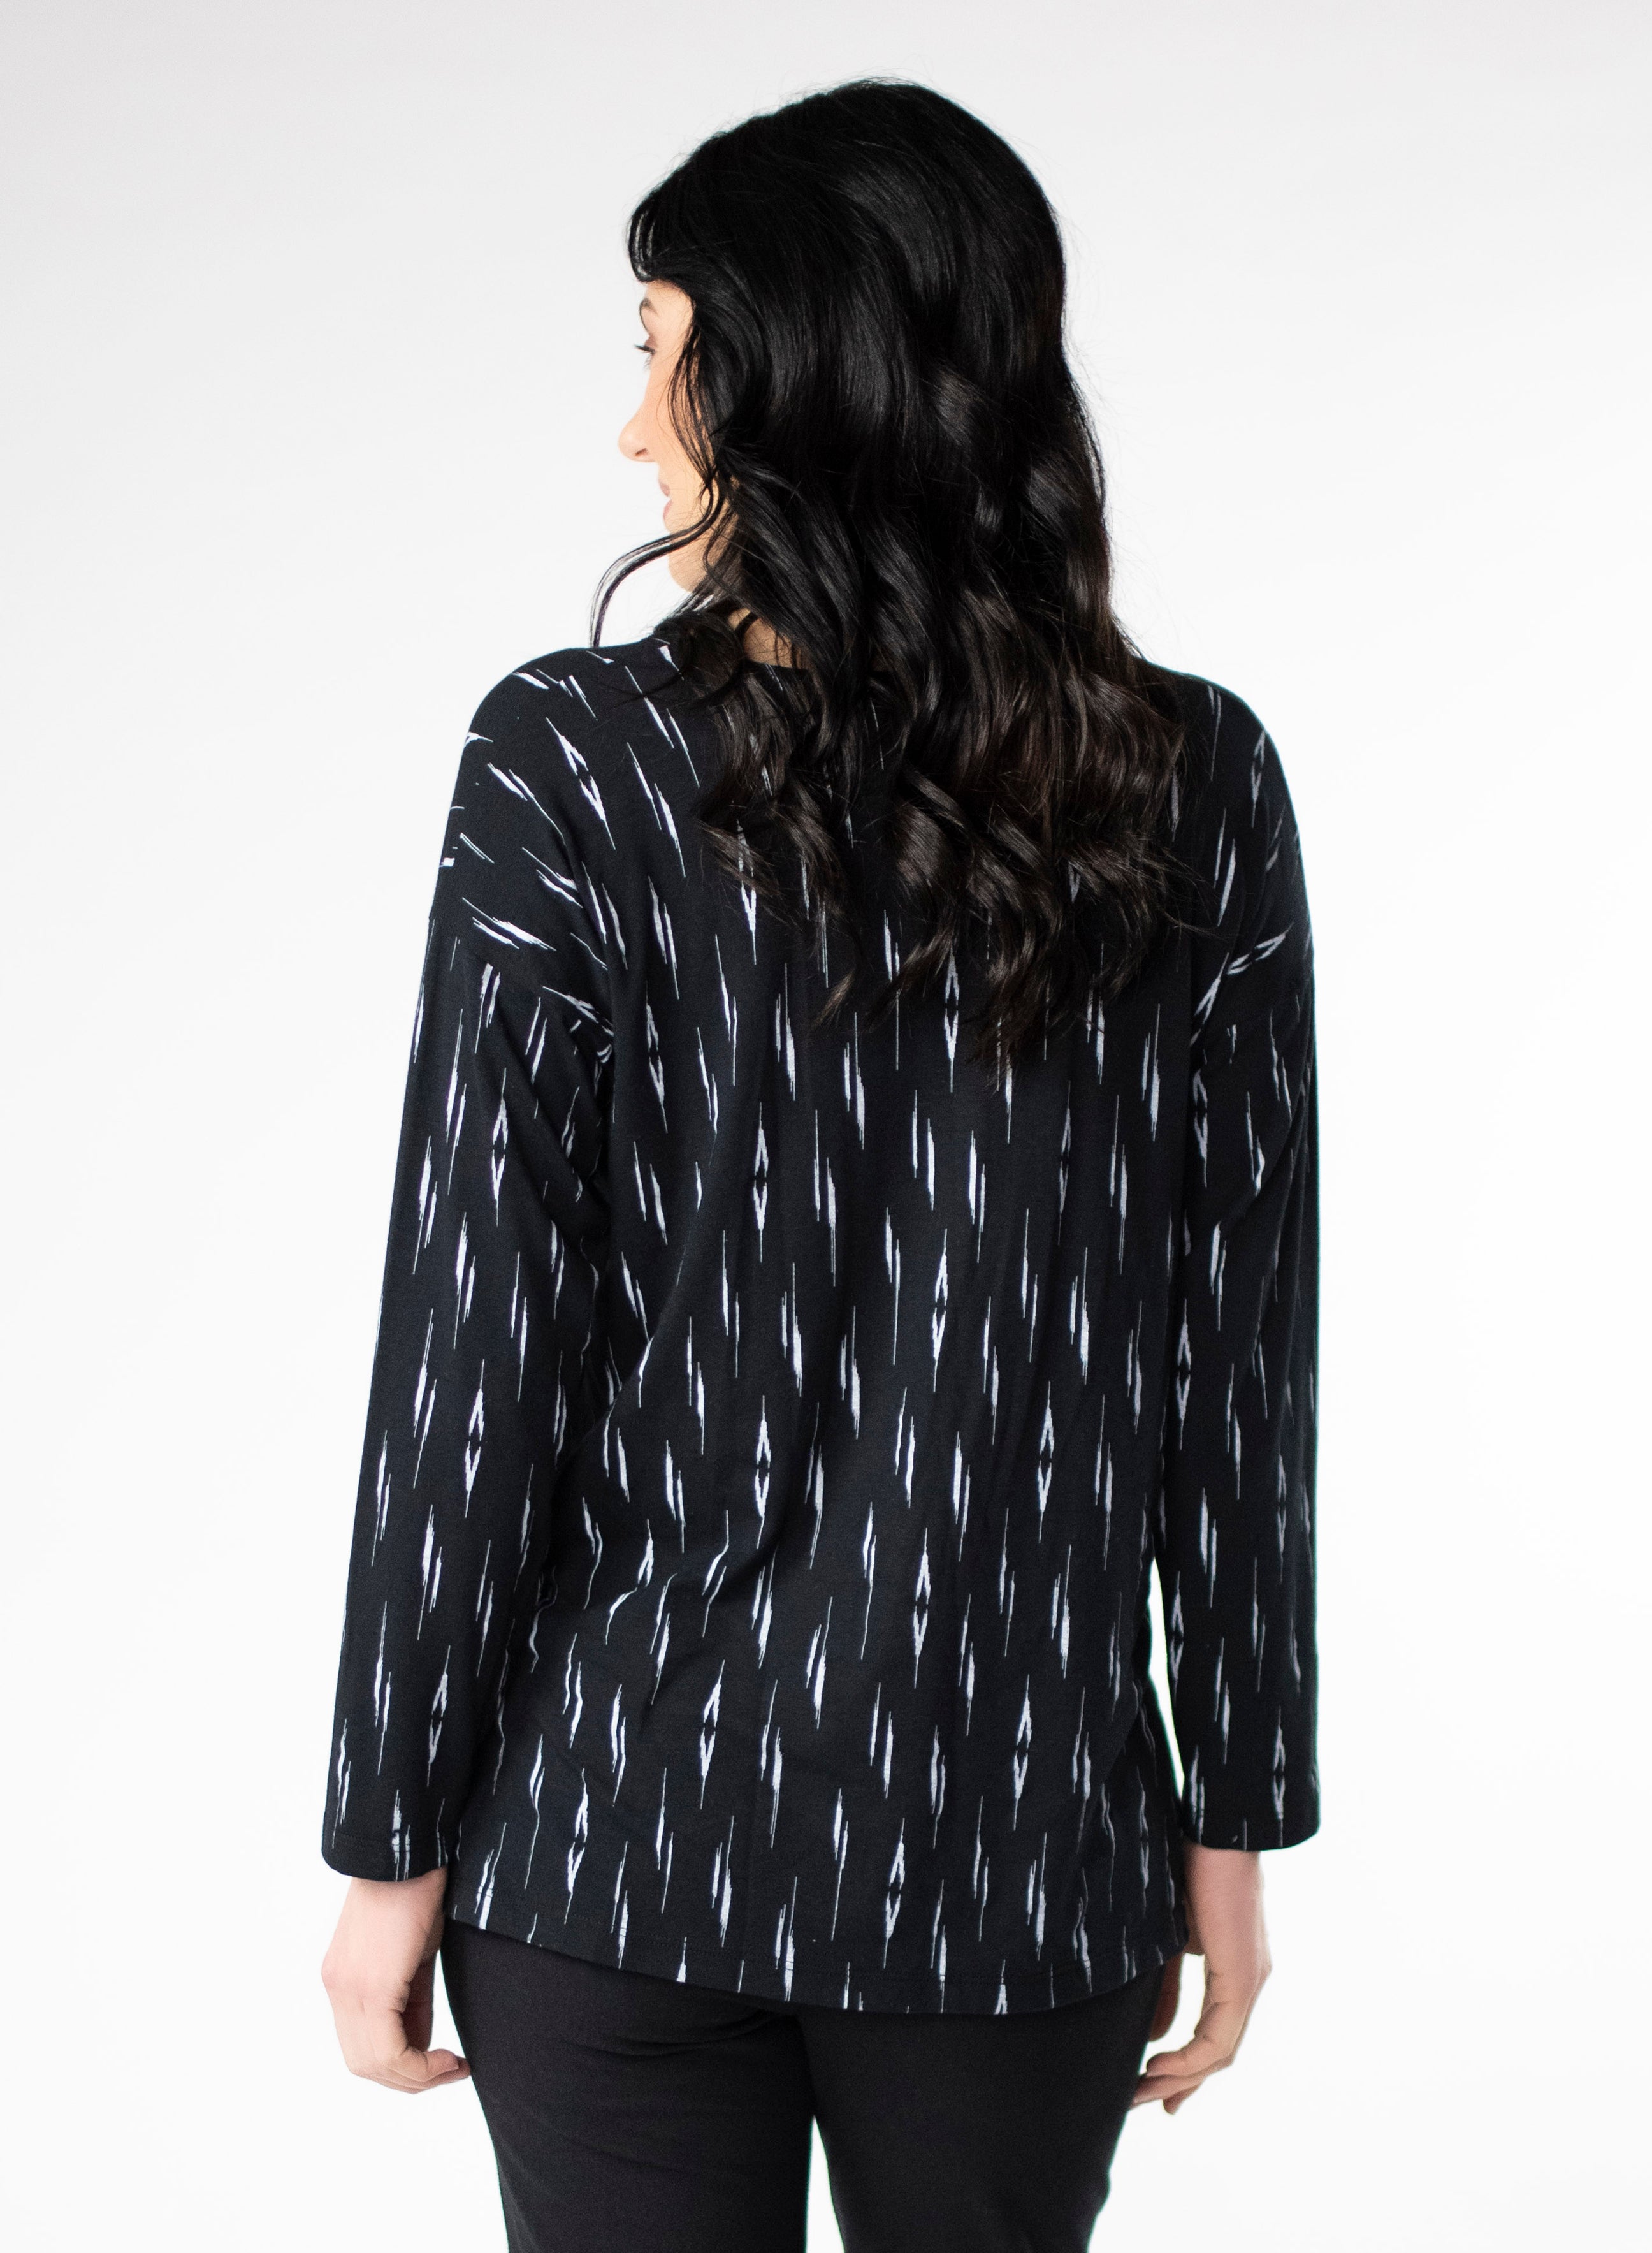 Black and White patterned long sleeve top with scoop neck and relaxed fit to the body. Step hem with a small side slit.